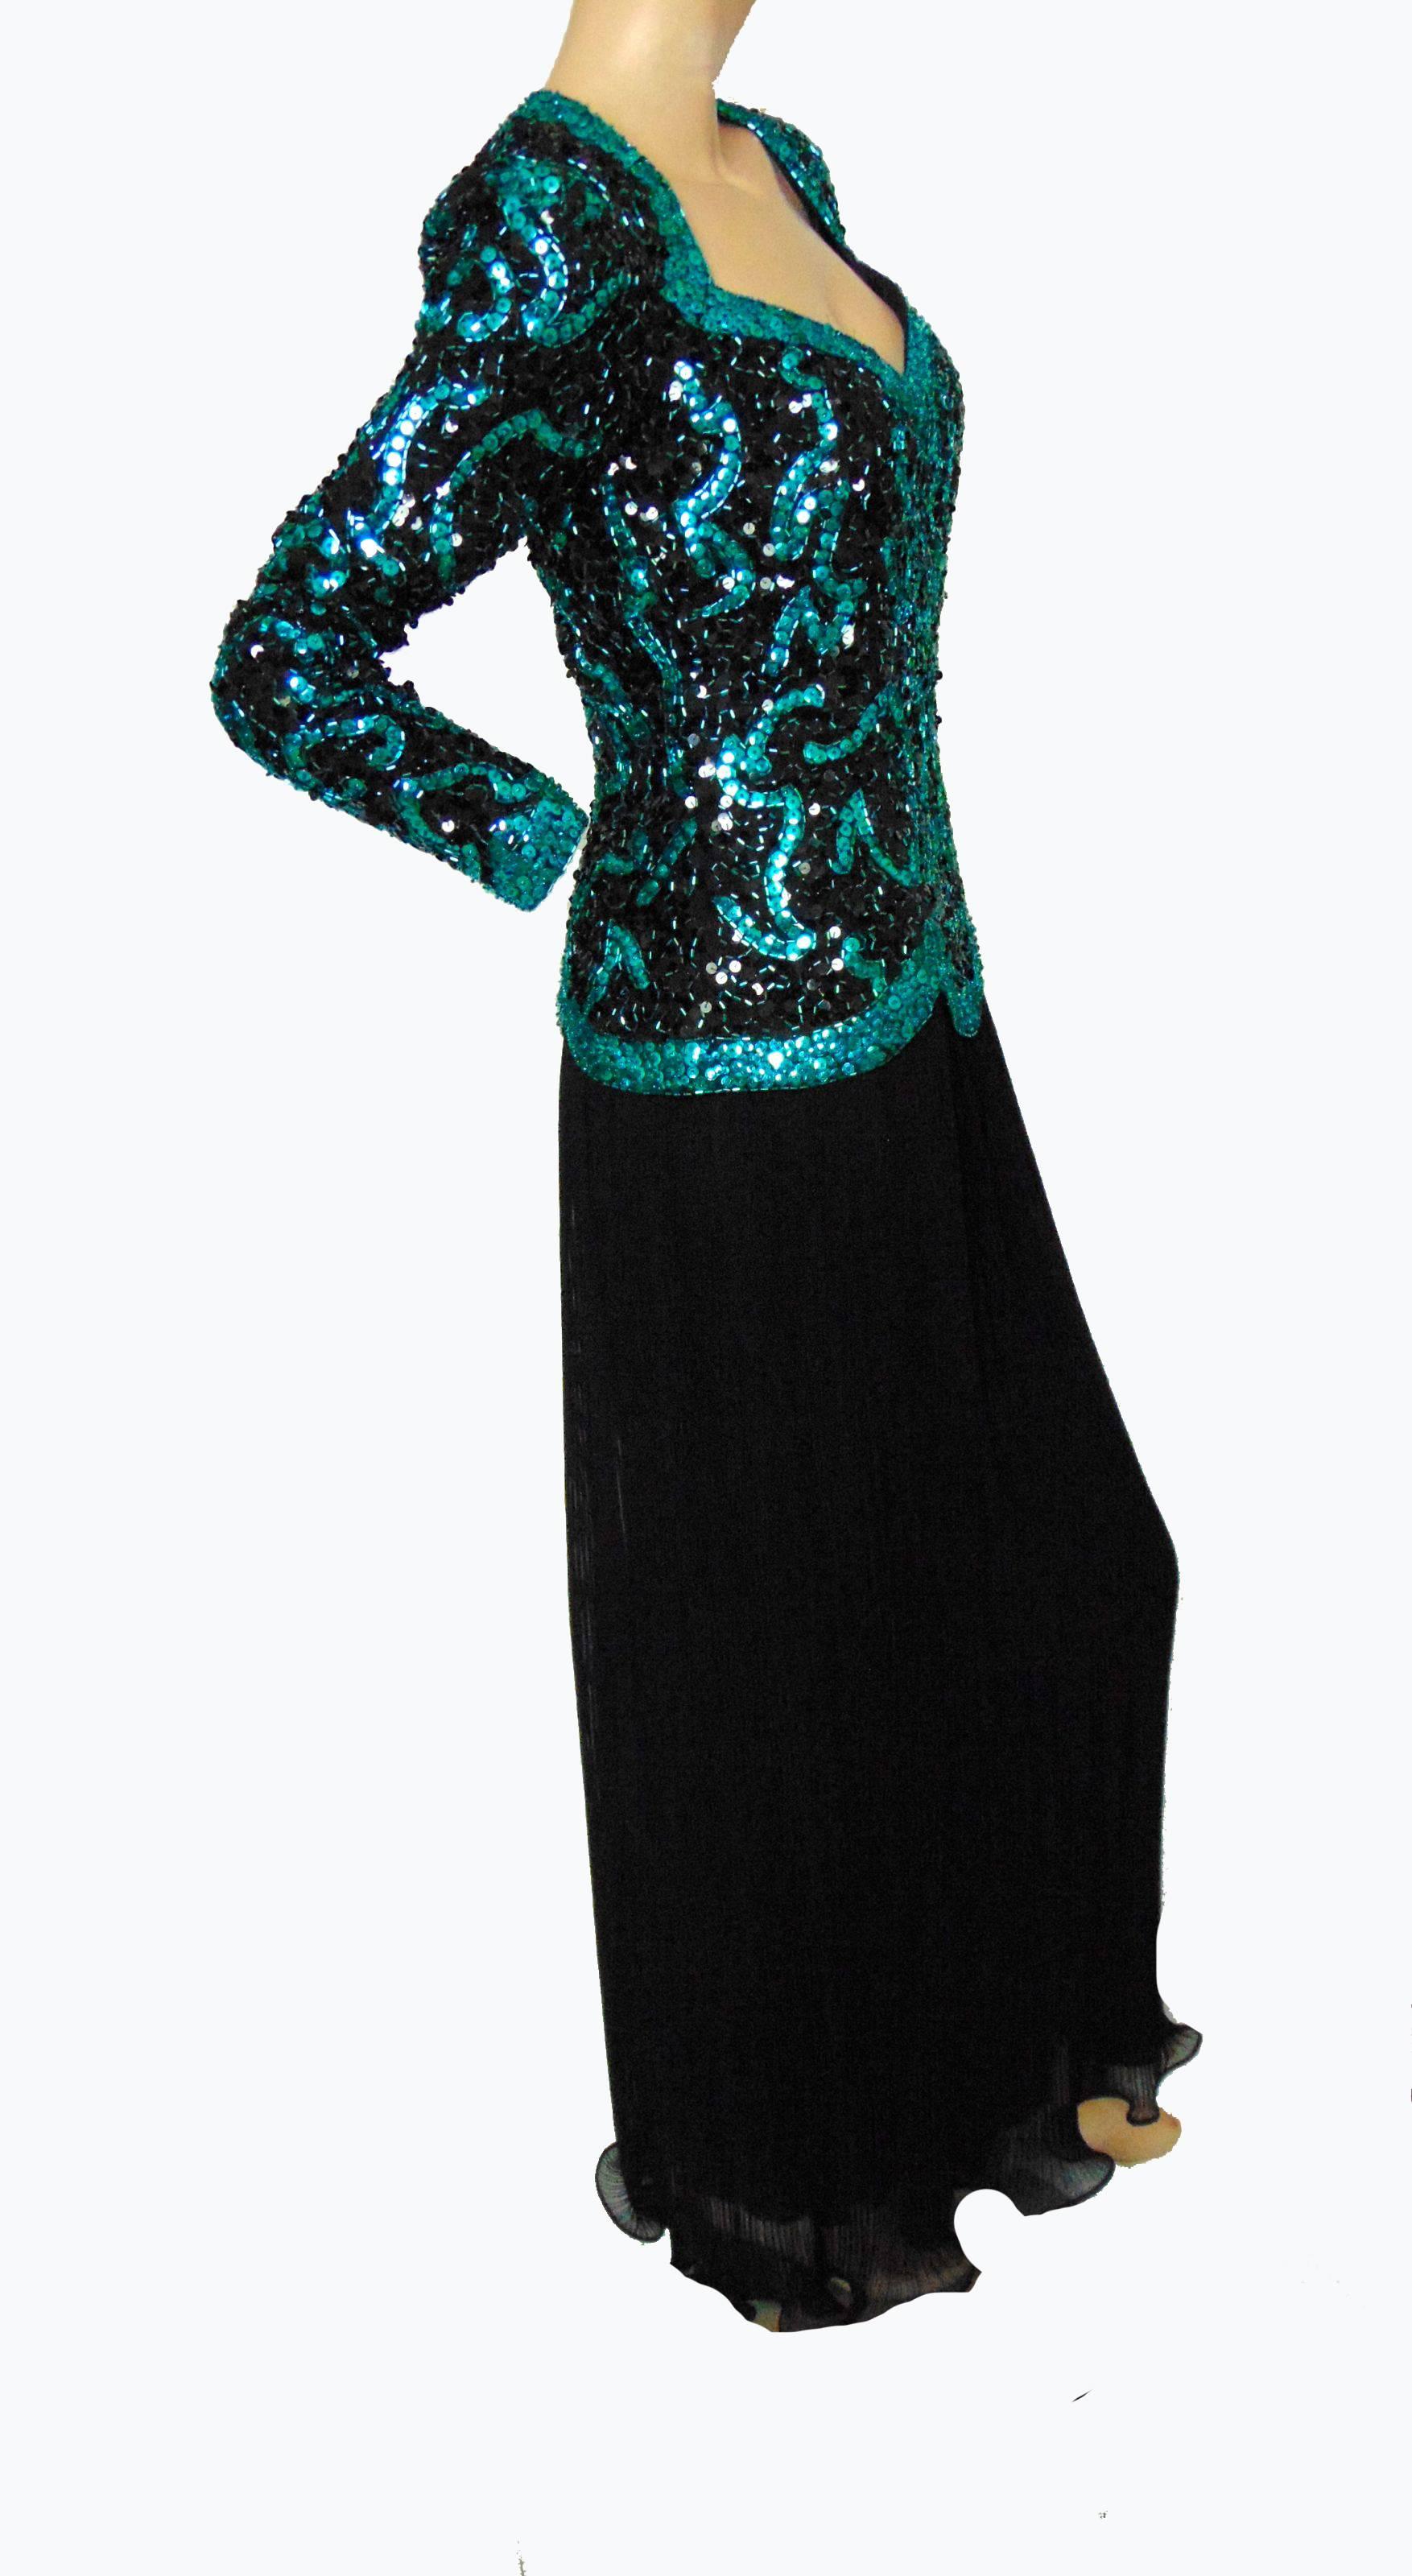 Black Fabulous Evening Gown Niteline by Della Roufogali Green Sequins New Tags Size 6